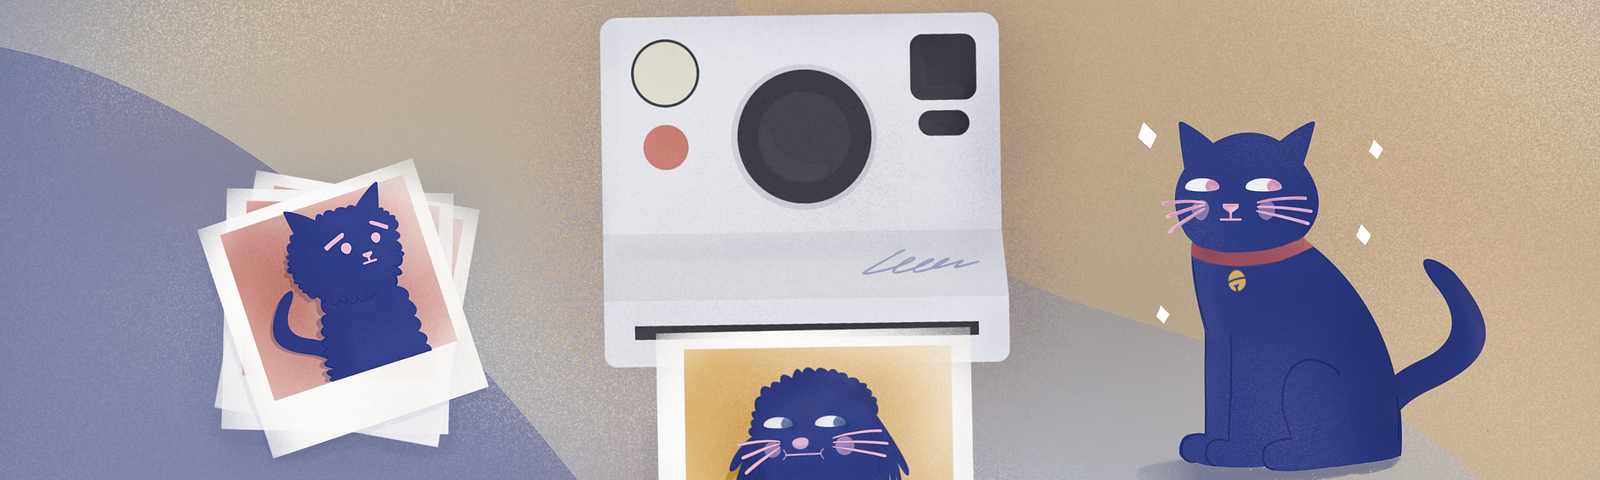 An illustrated graphic showing a Polaroid camera printing an incorrect photograph of dog with whiskers, with a cat as the photo subject in the foreground, and a pile of printed Polaroid pictures to the side.